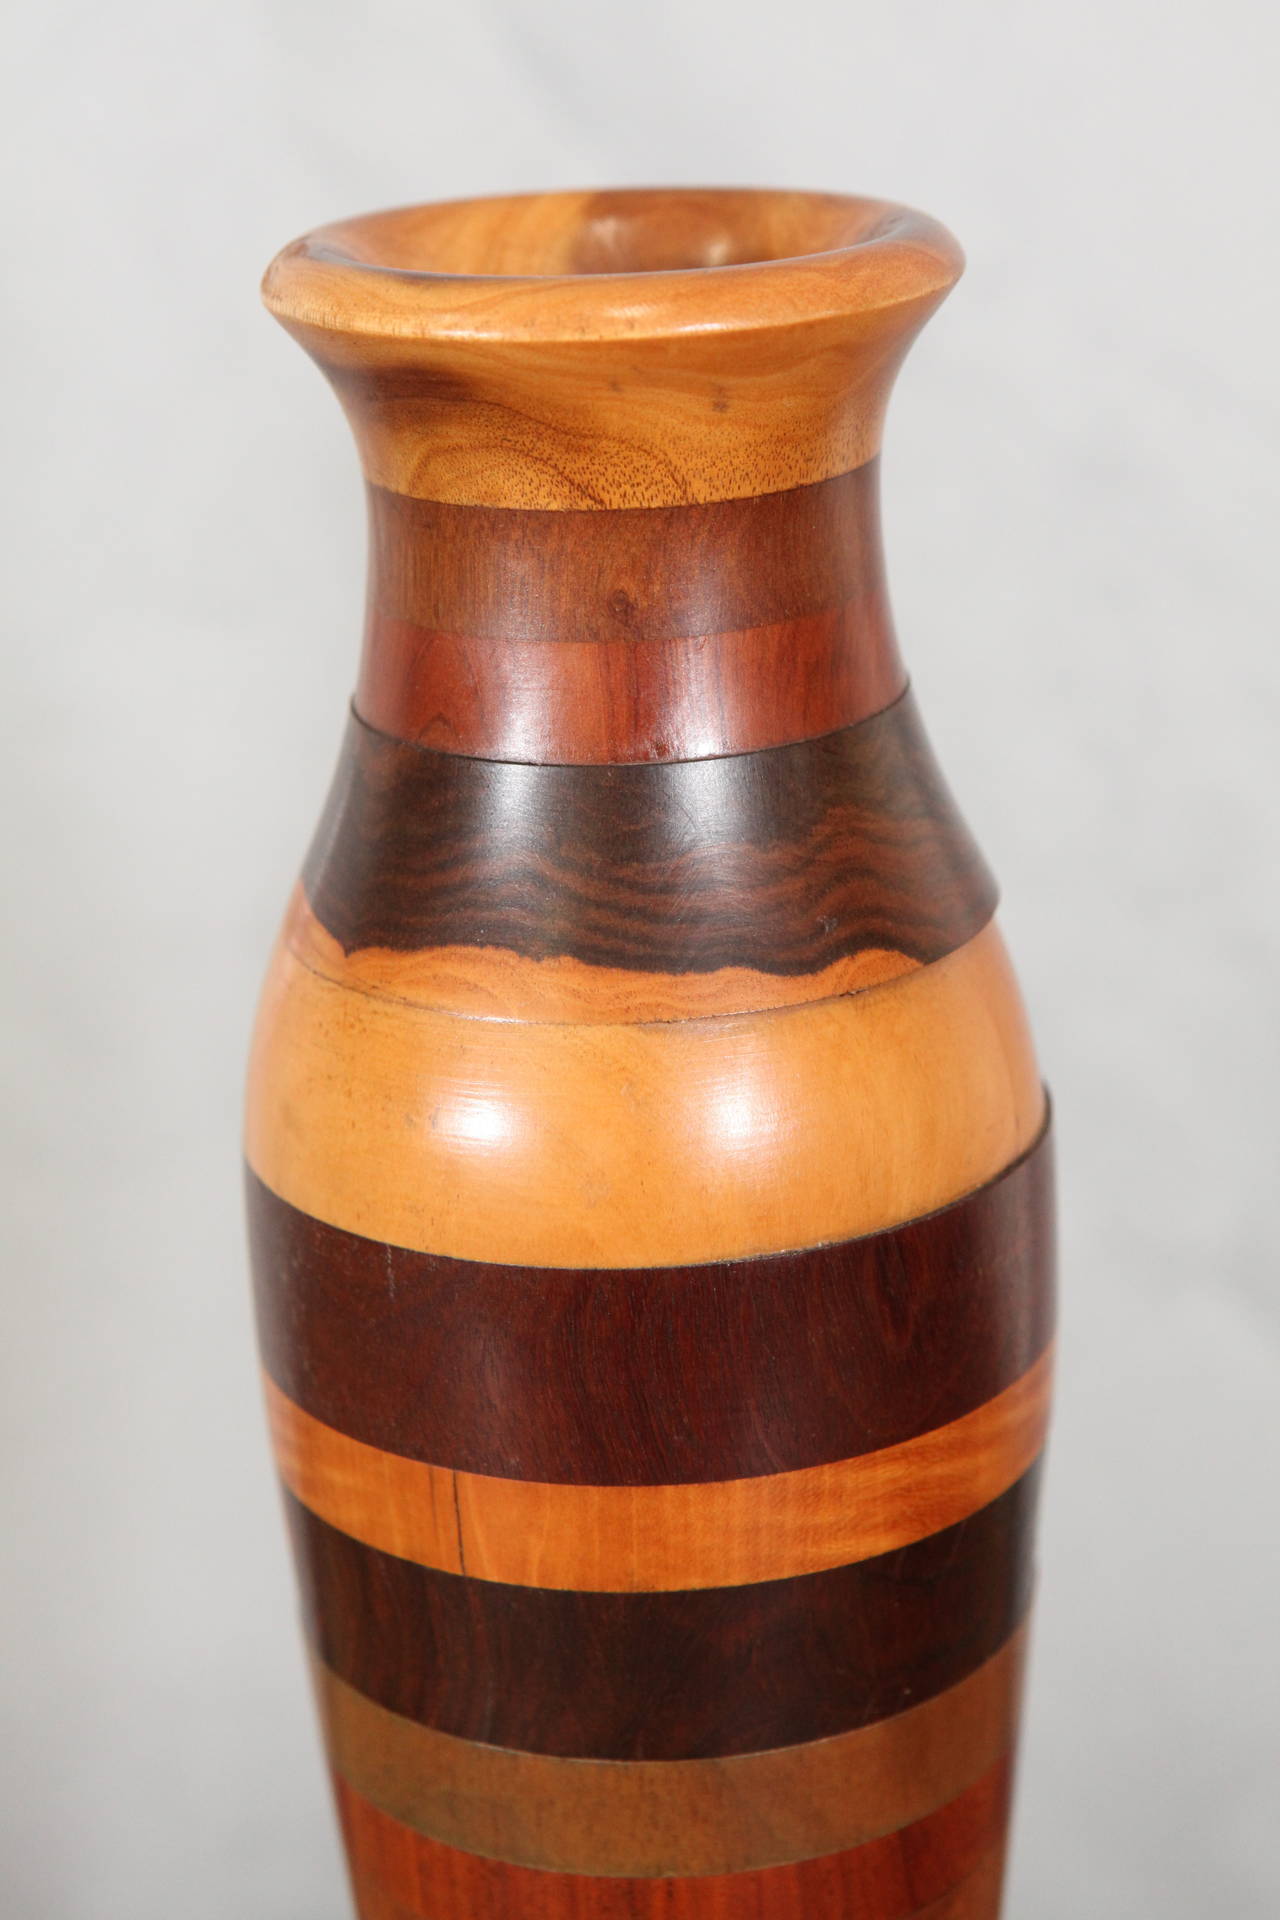 These vases are beautifully crafted pieces from New England. Note the simplicity and elegance of their shape which indicates they were made by a craftsman prior to mid-19th century. The vases are made of 15 different kinds of wood listed in hand